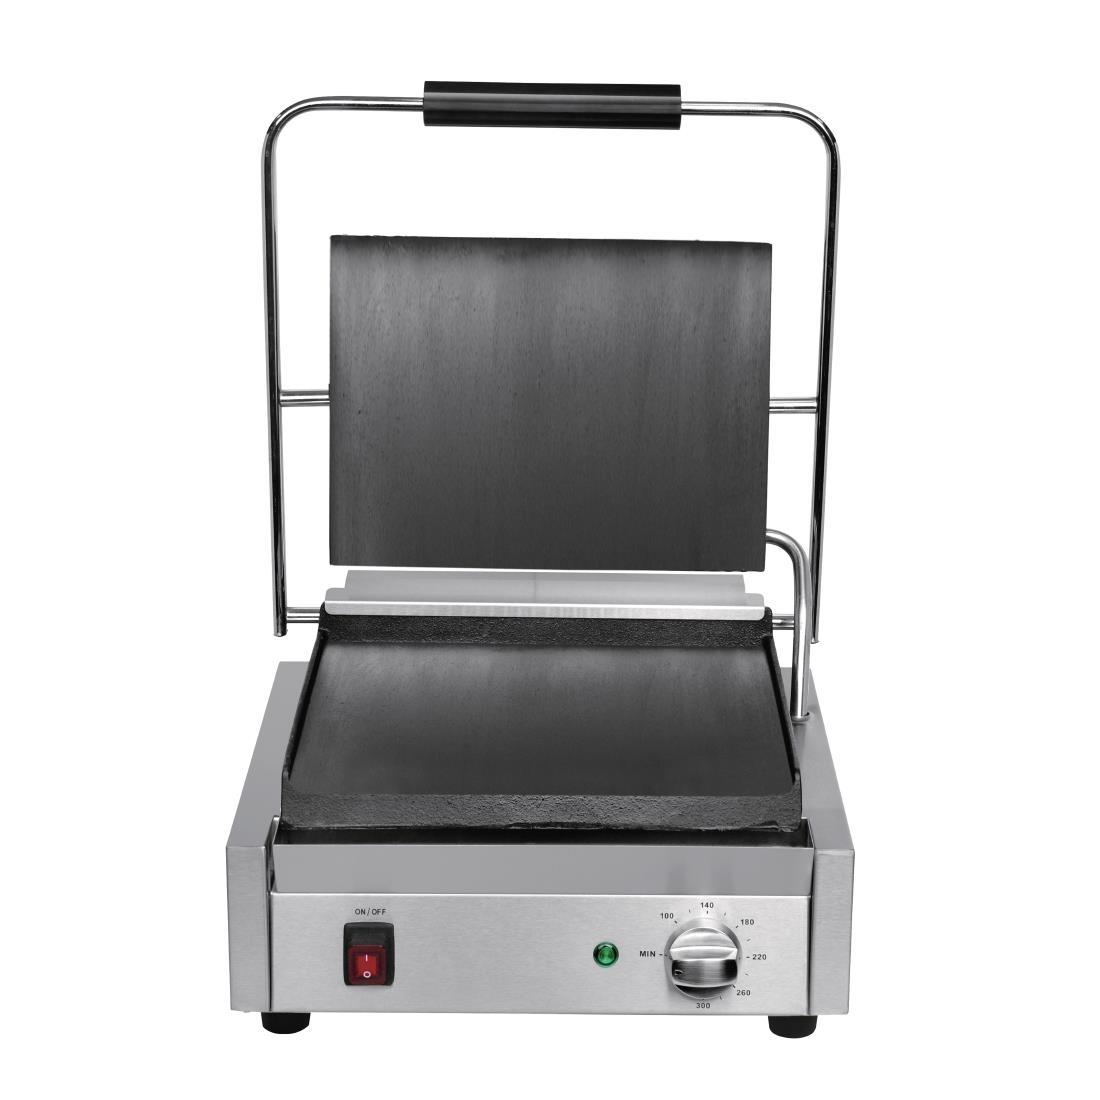 Buffalo Bistro Large Contact Grill - DY997  - 5